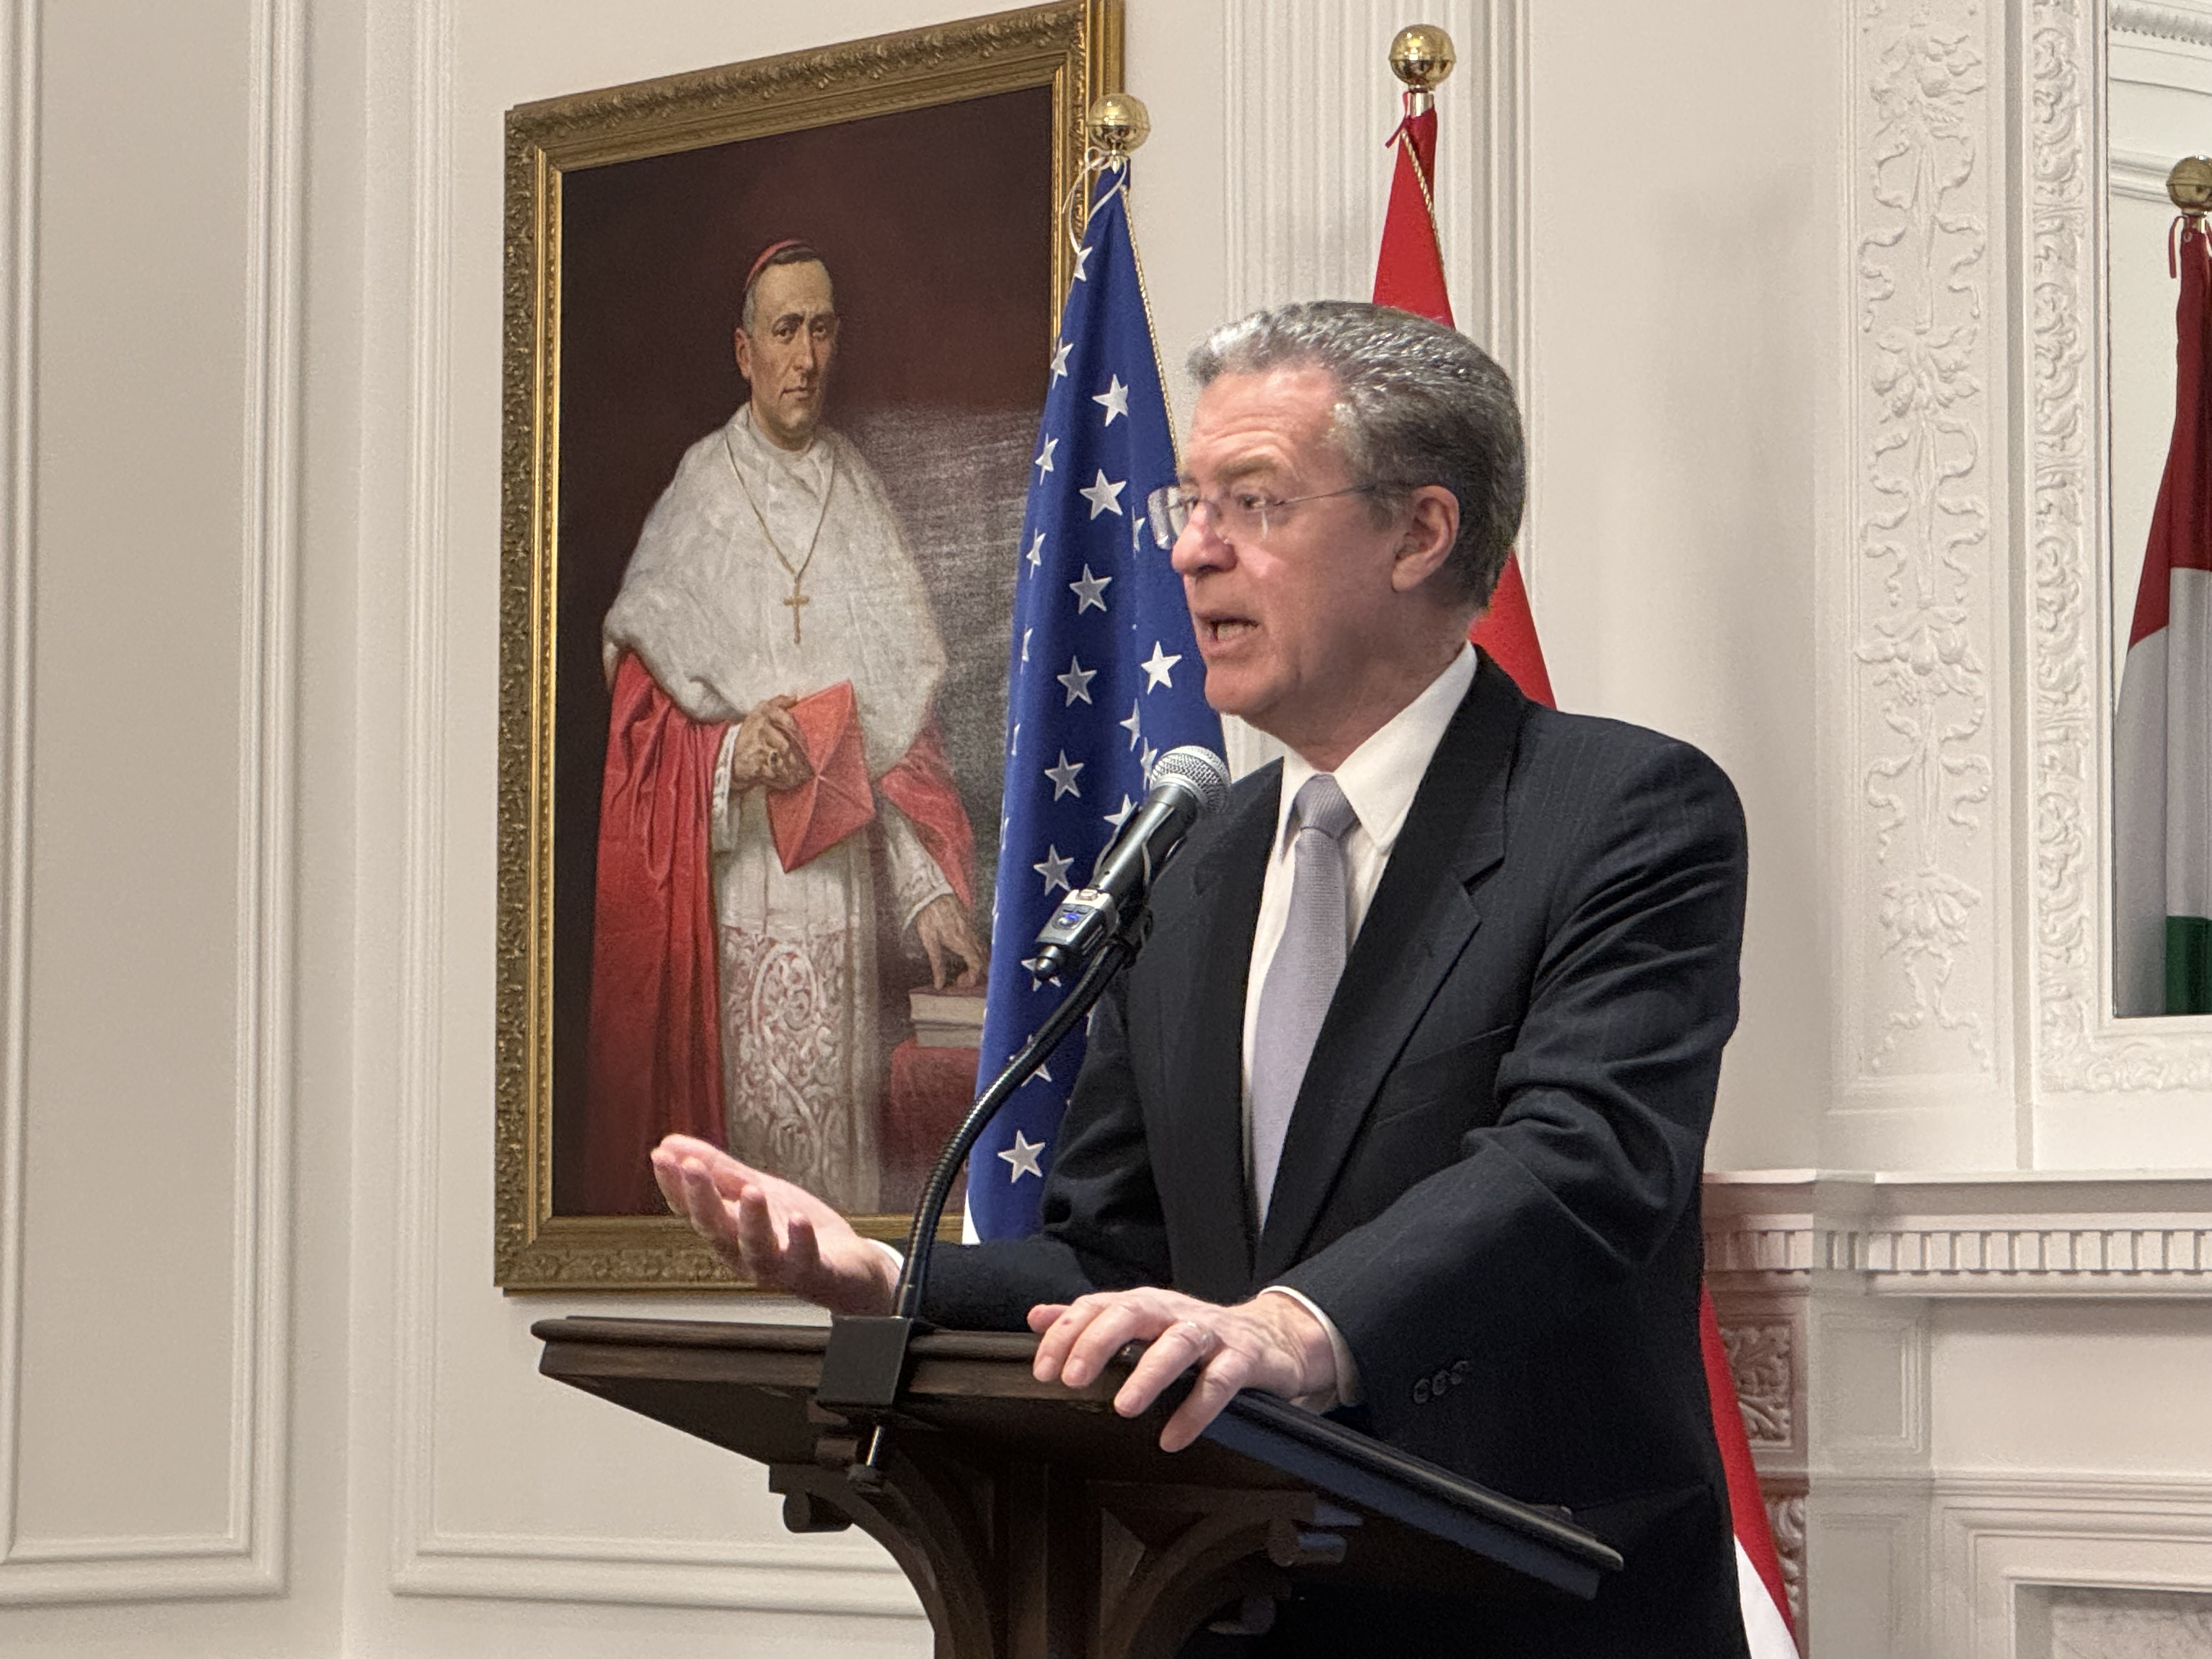 Sam Brownback delivers opening remarks at the Hungarian Embassy, which hosted the conference’s opening reception.